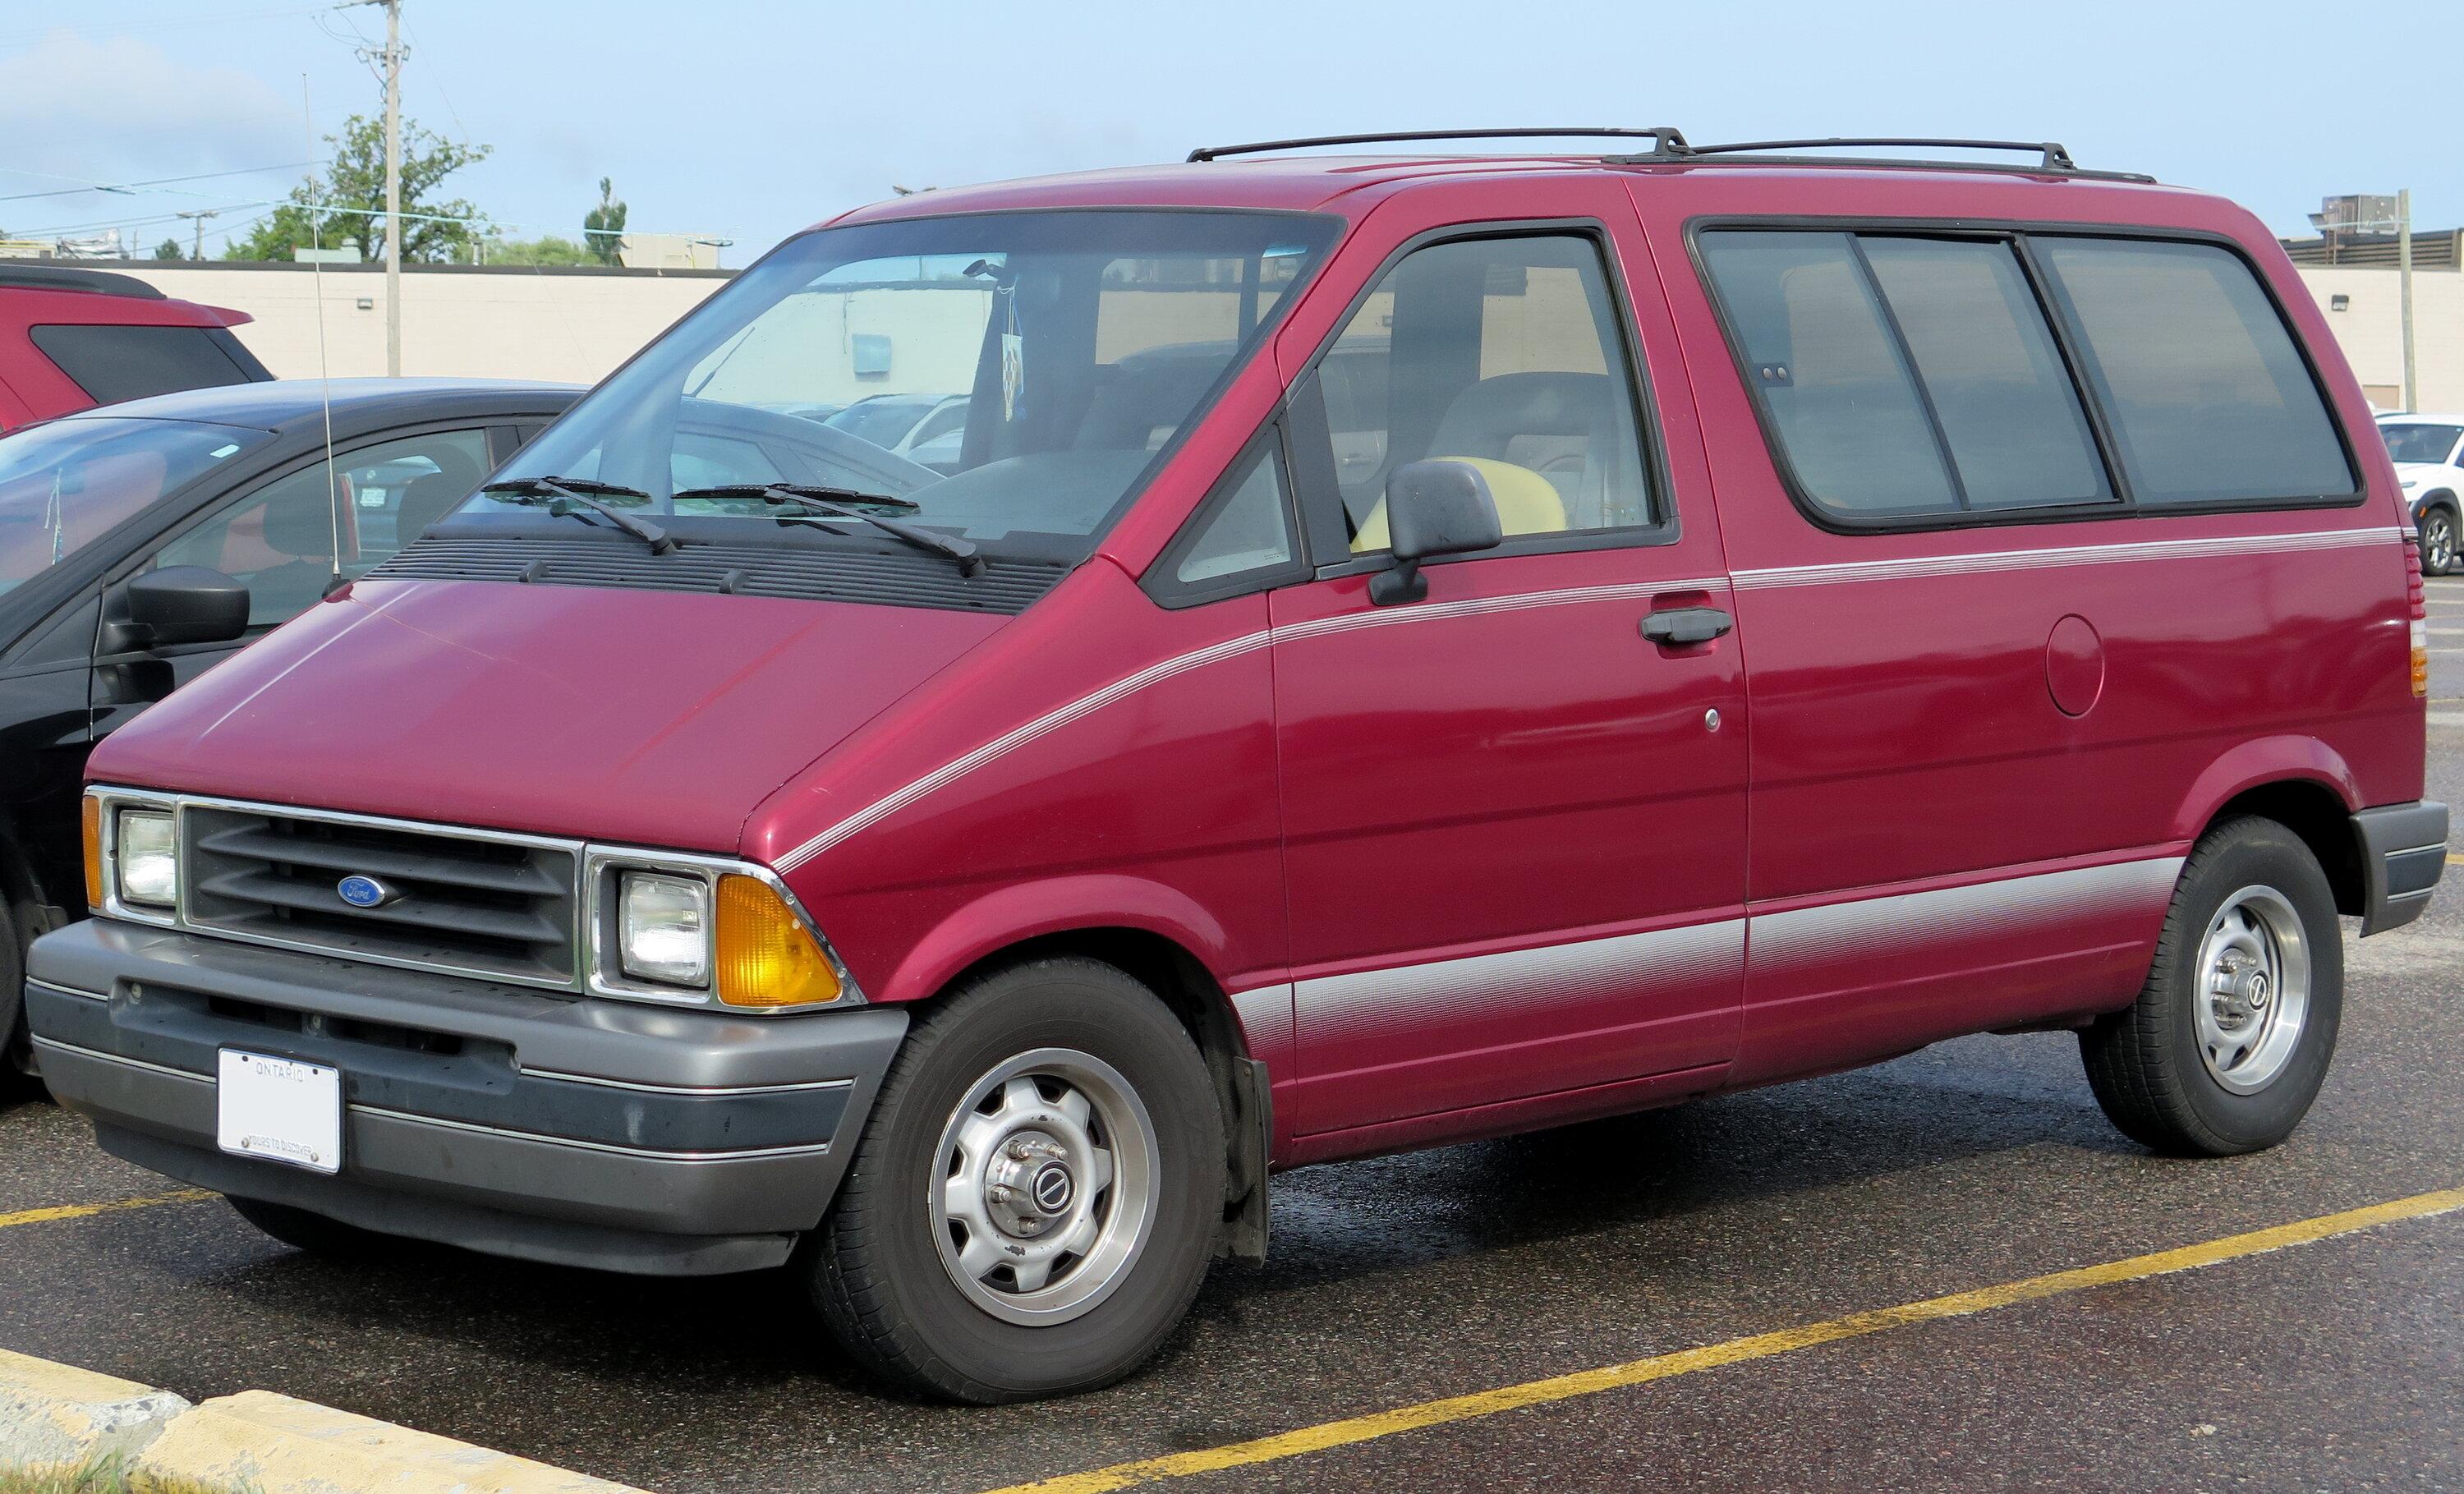 Ford F-150 Lightning Silverado EV 2025 Estimation on Reservations 1991_Ford_Aerostar_XL_in_Electric_Currant_Red,_Front_Left,_09-13-2022